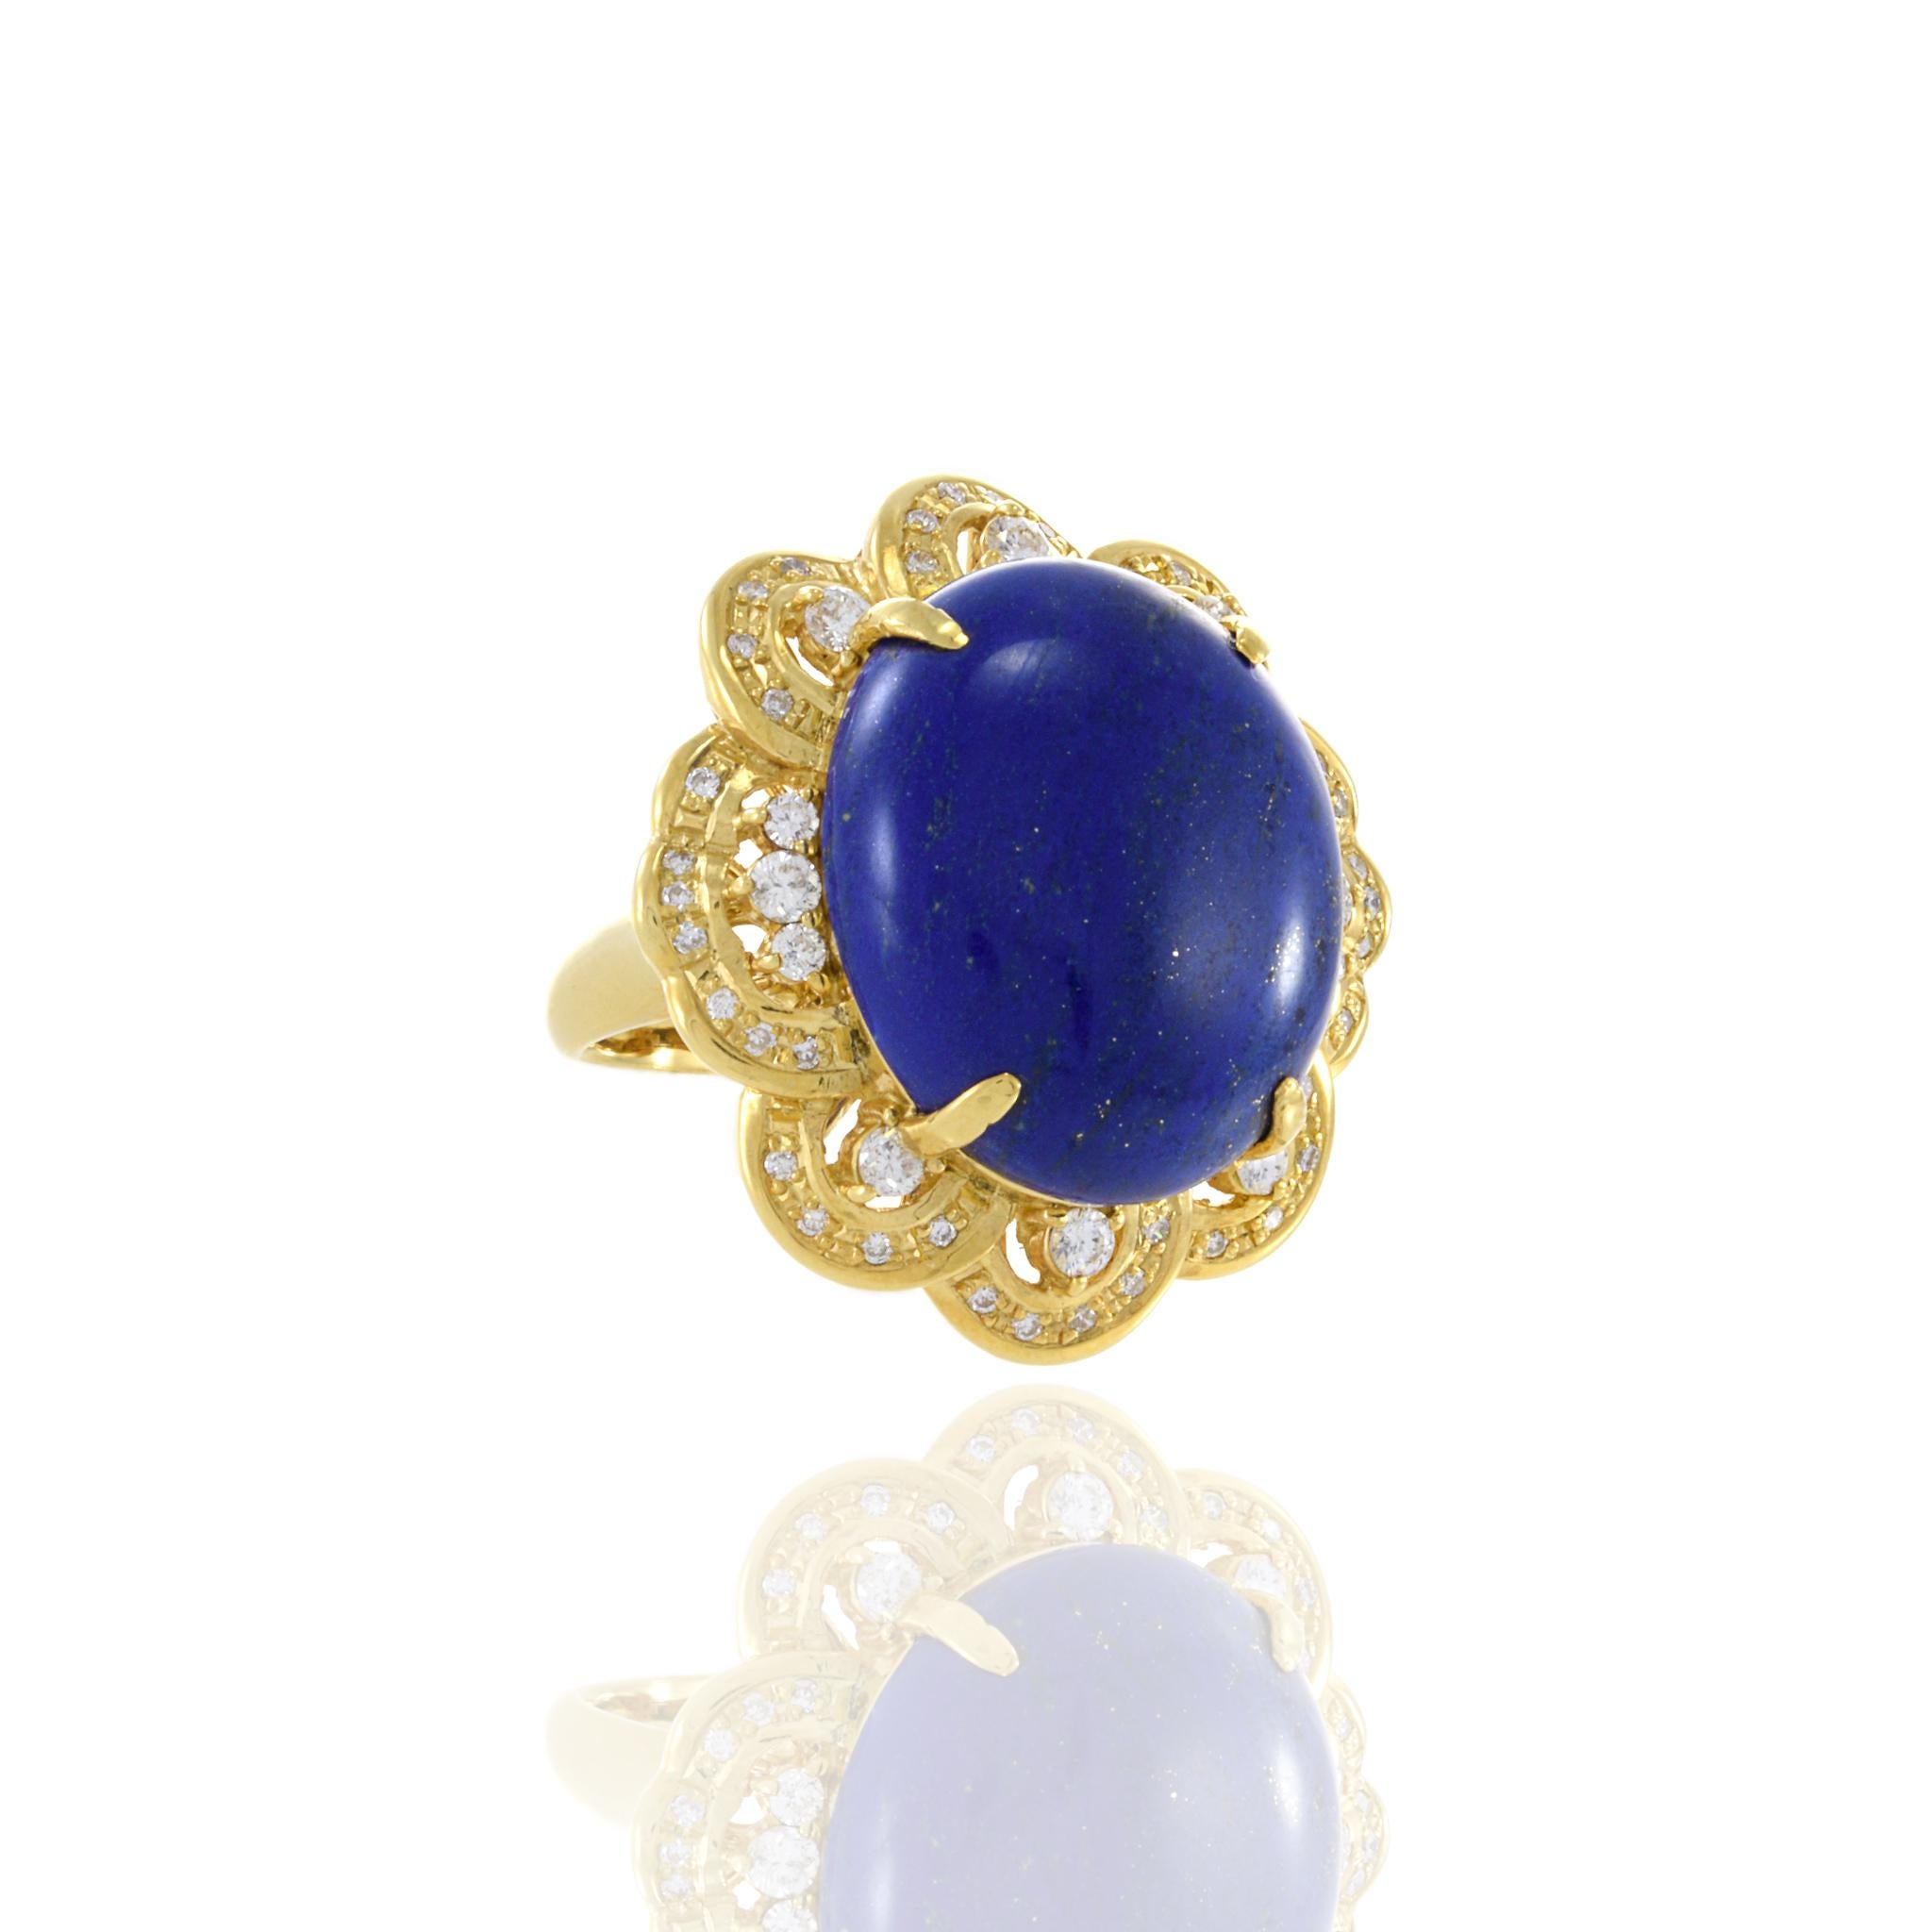 
This Retro Era 18KT Yellow Gold Lapis Lazuli and Diamond Cocktail Ring is an extraordinary testament to the allure and grandeur of vintage jewelry design. At its heart sits a magnificent cabochon cut natural lapis lazuli, its deep blue hues